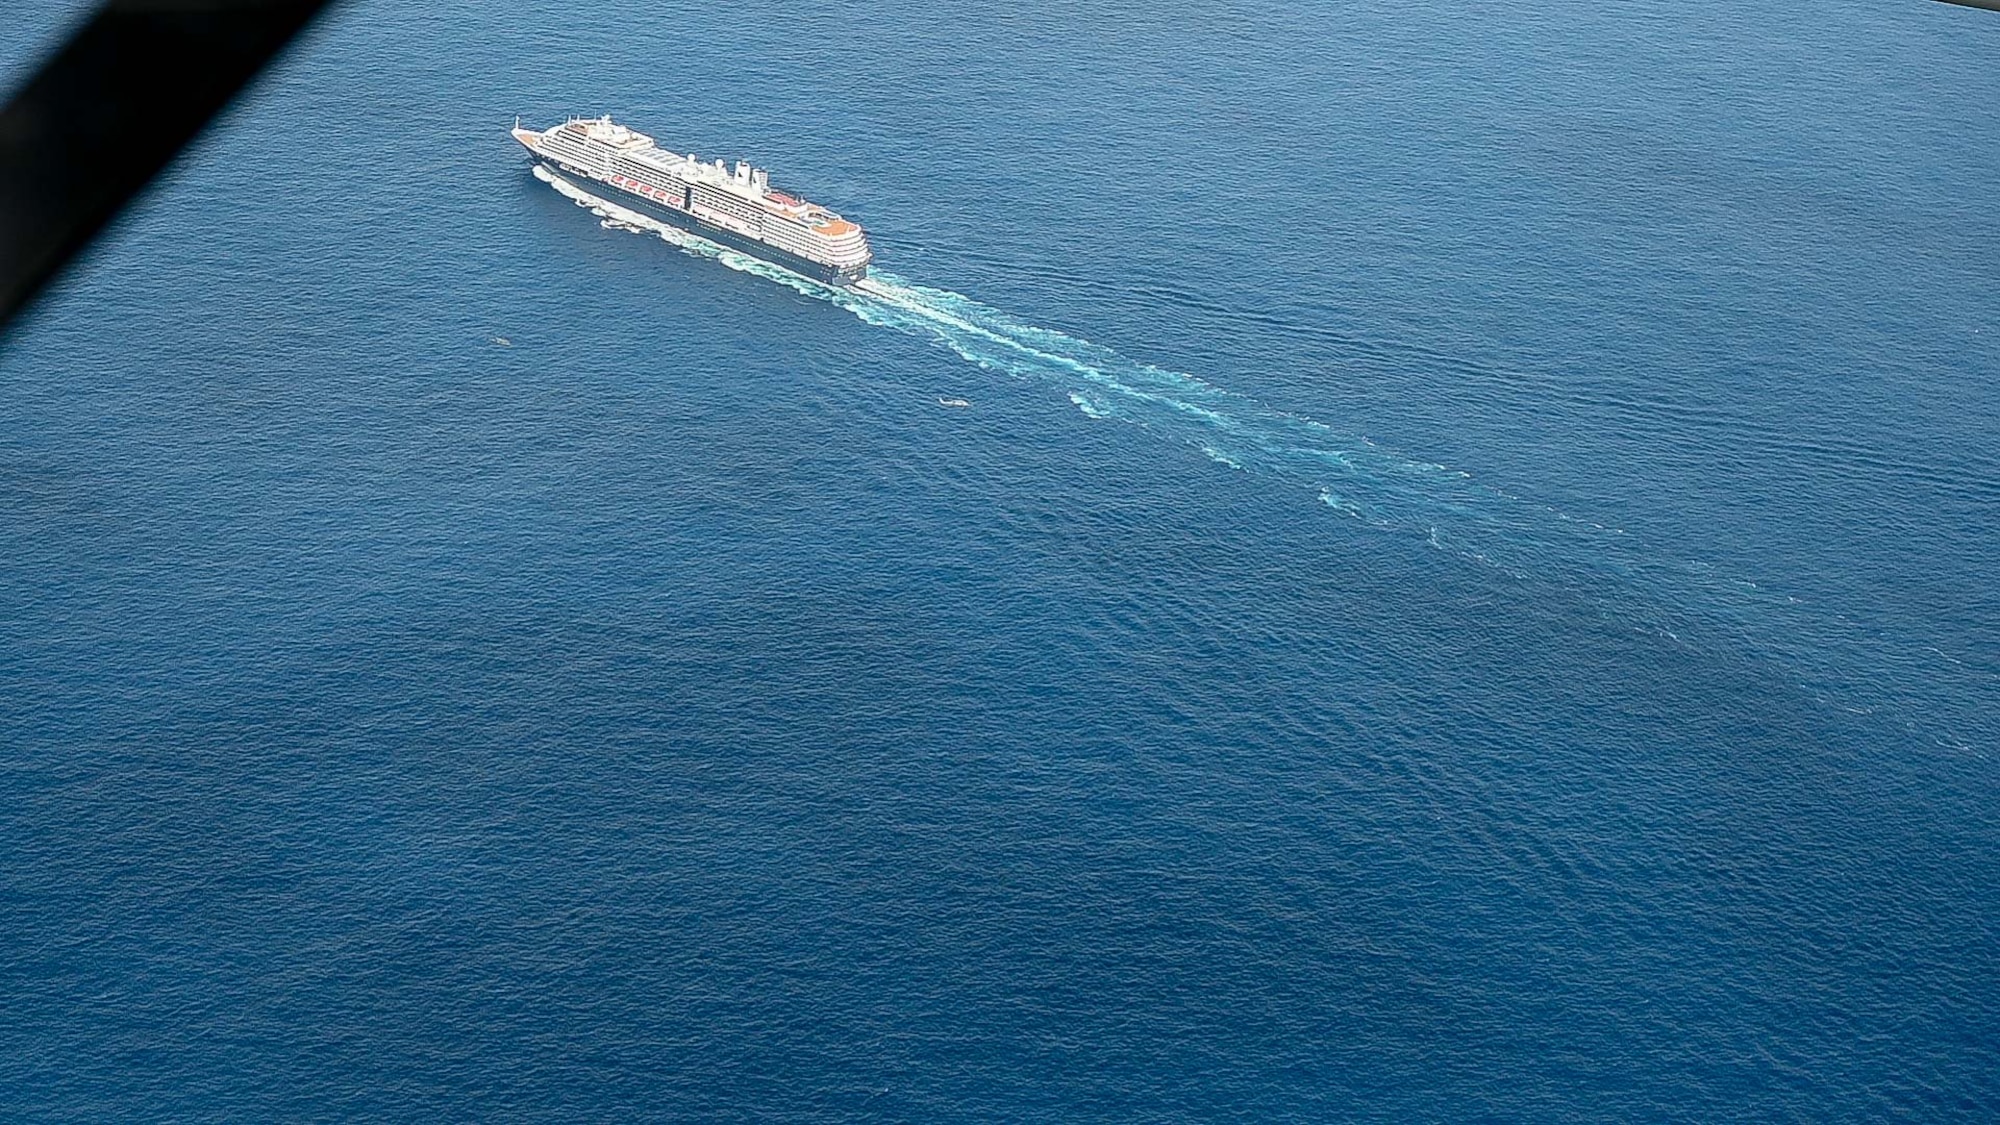 Pictured above is a ship sailing through the ocean.